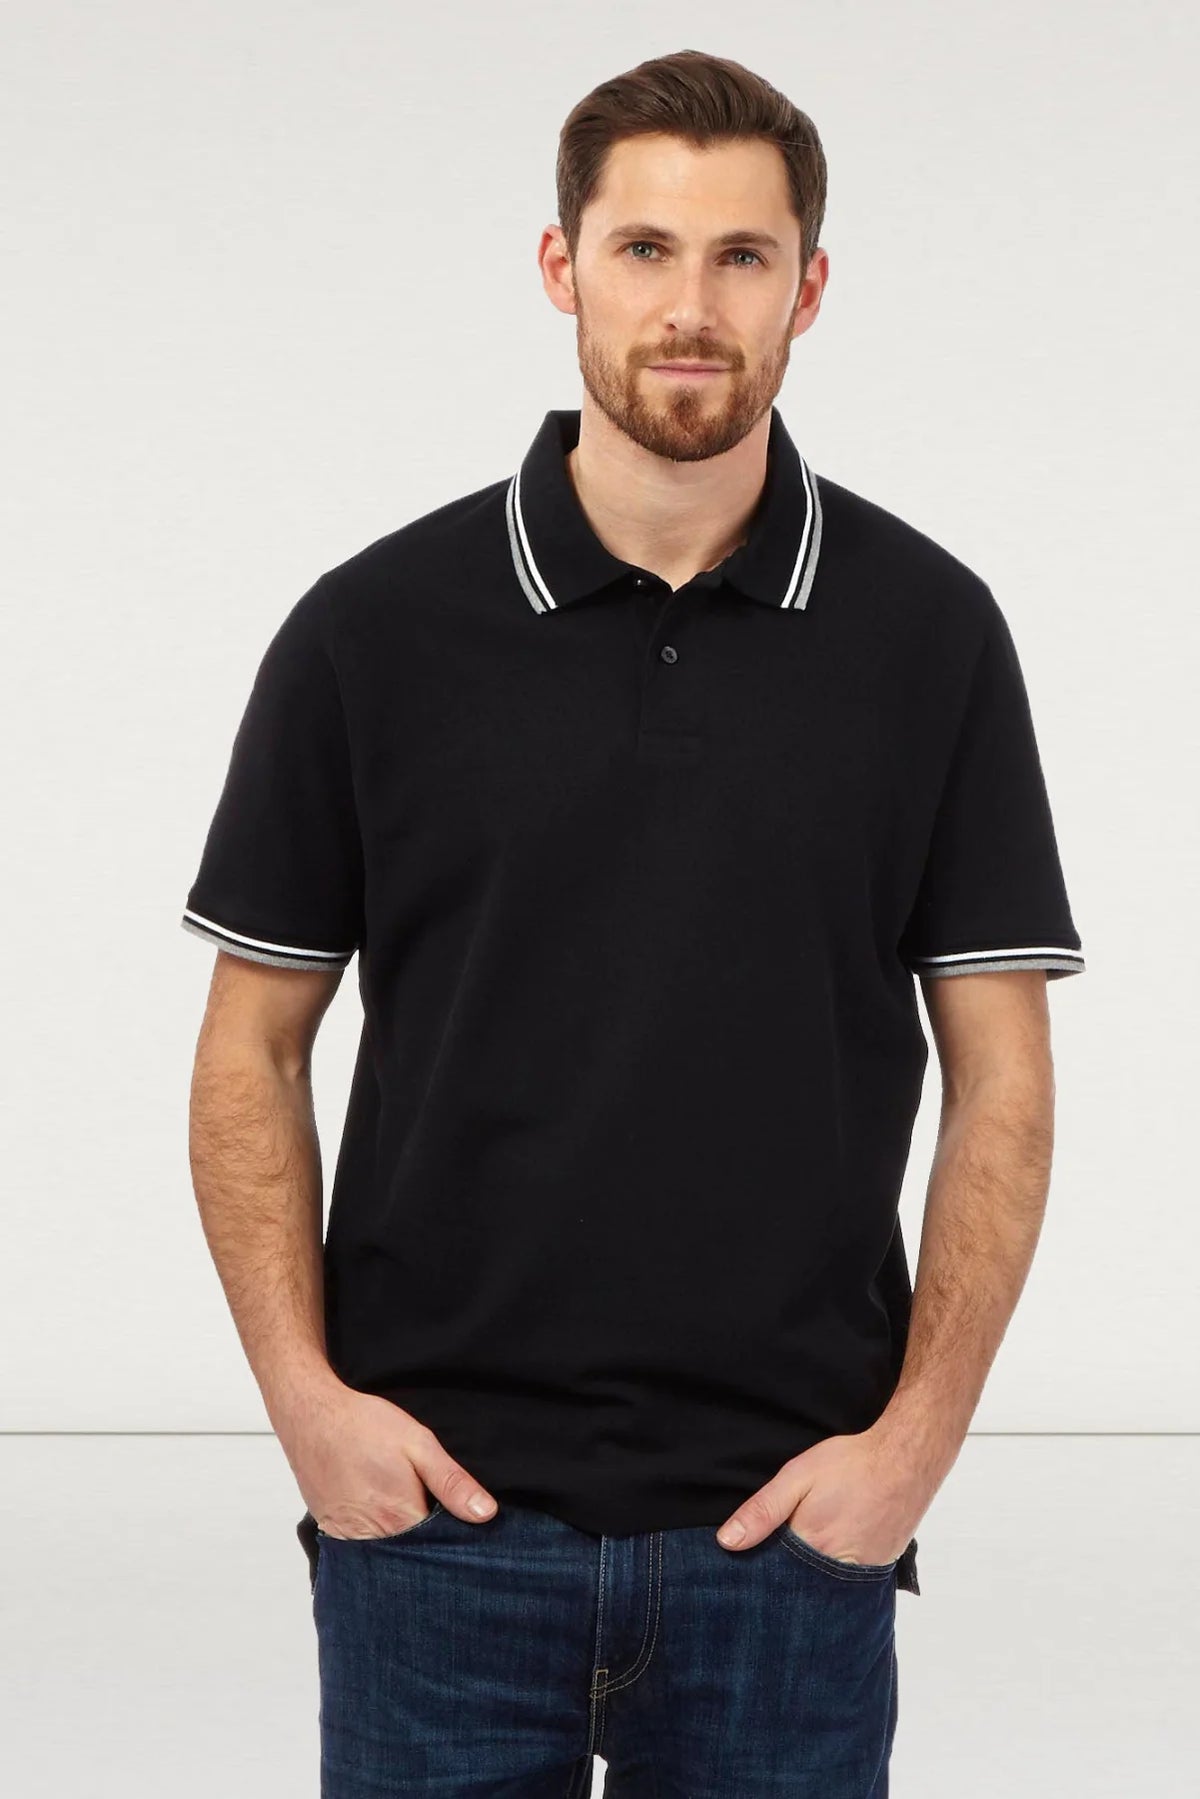 MAINE New England Polo Shirt Tipped Collar Black / S